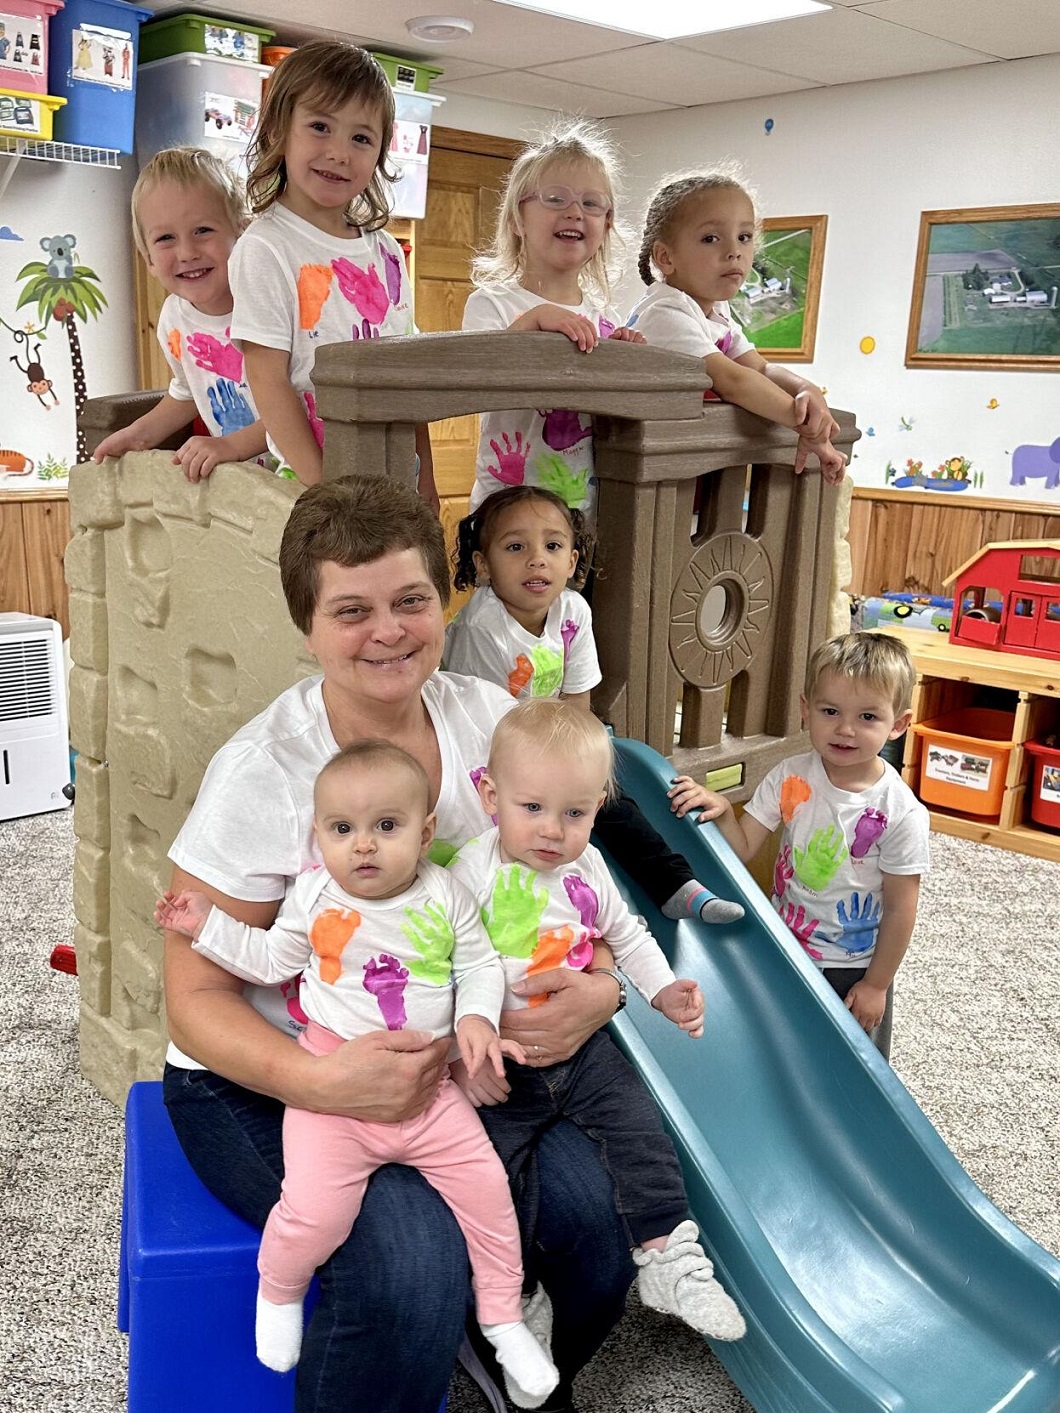 Patty Orth in Randall named ‘Child Care Provider of the Year’ Main Photo